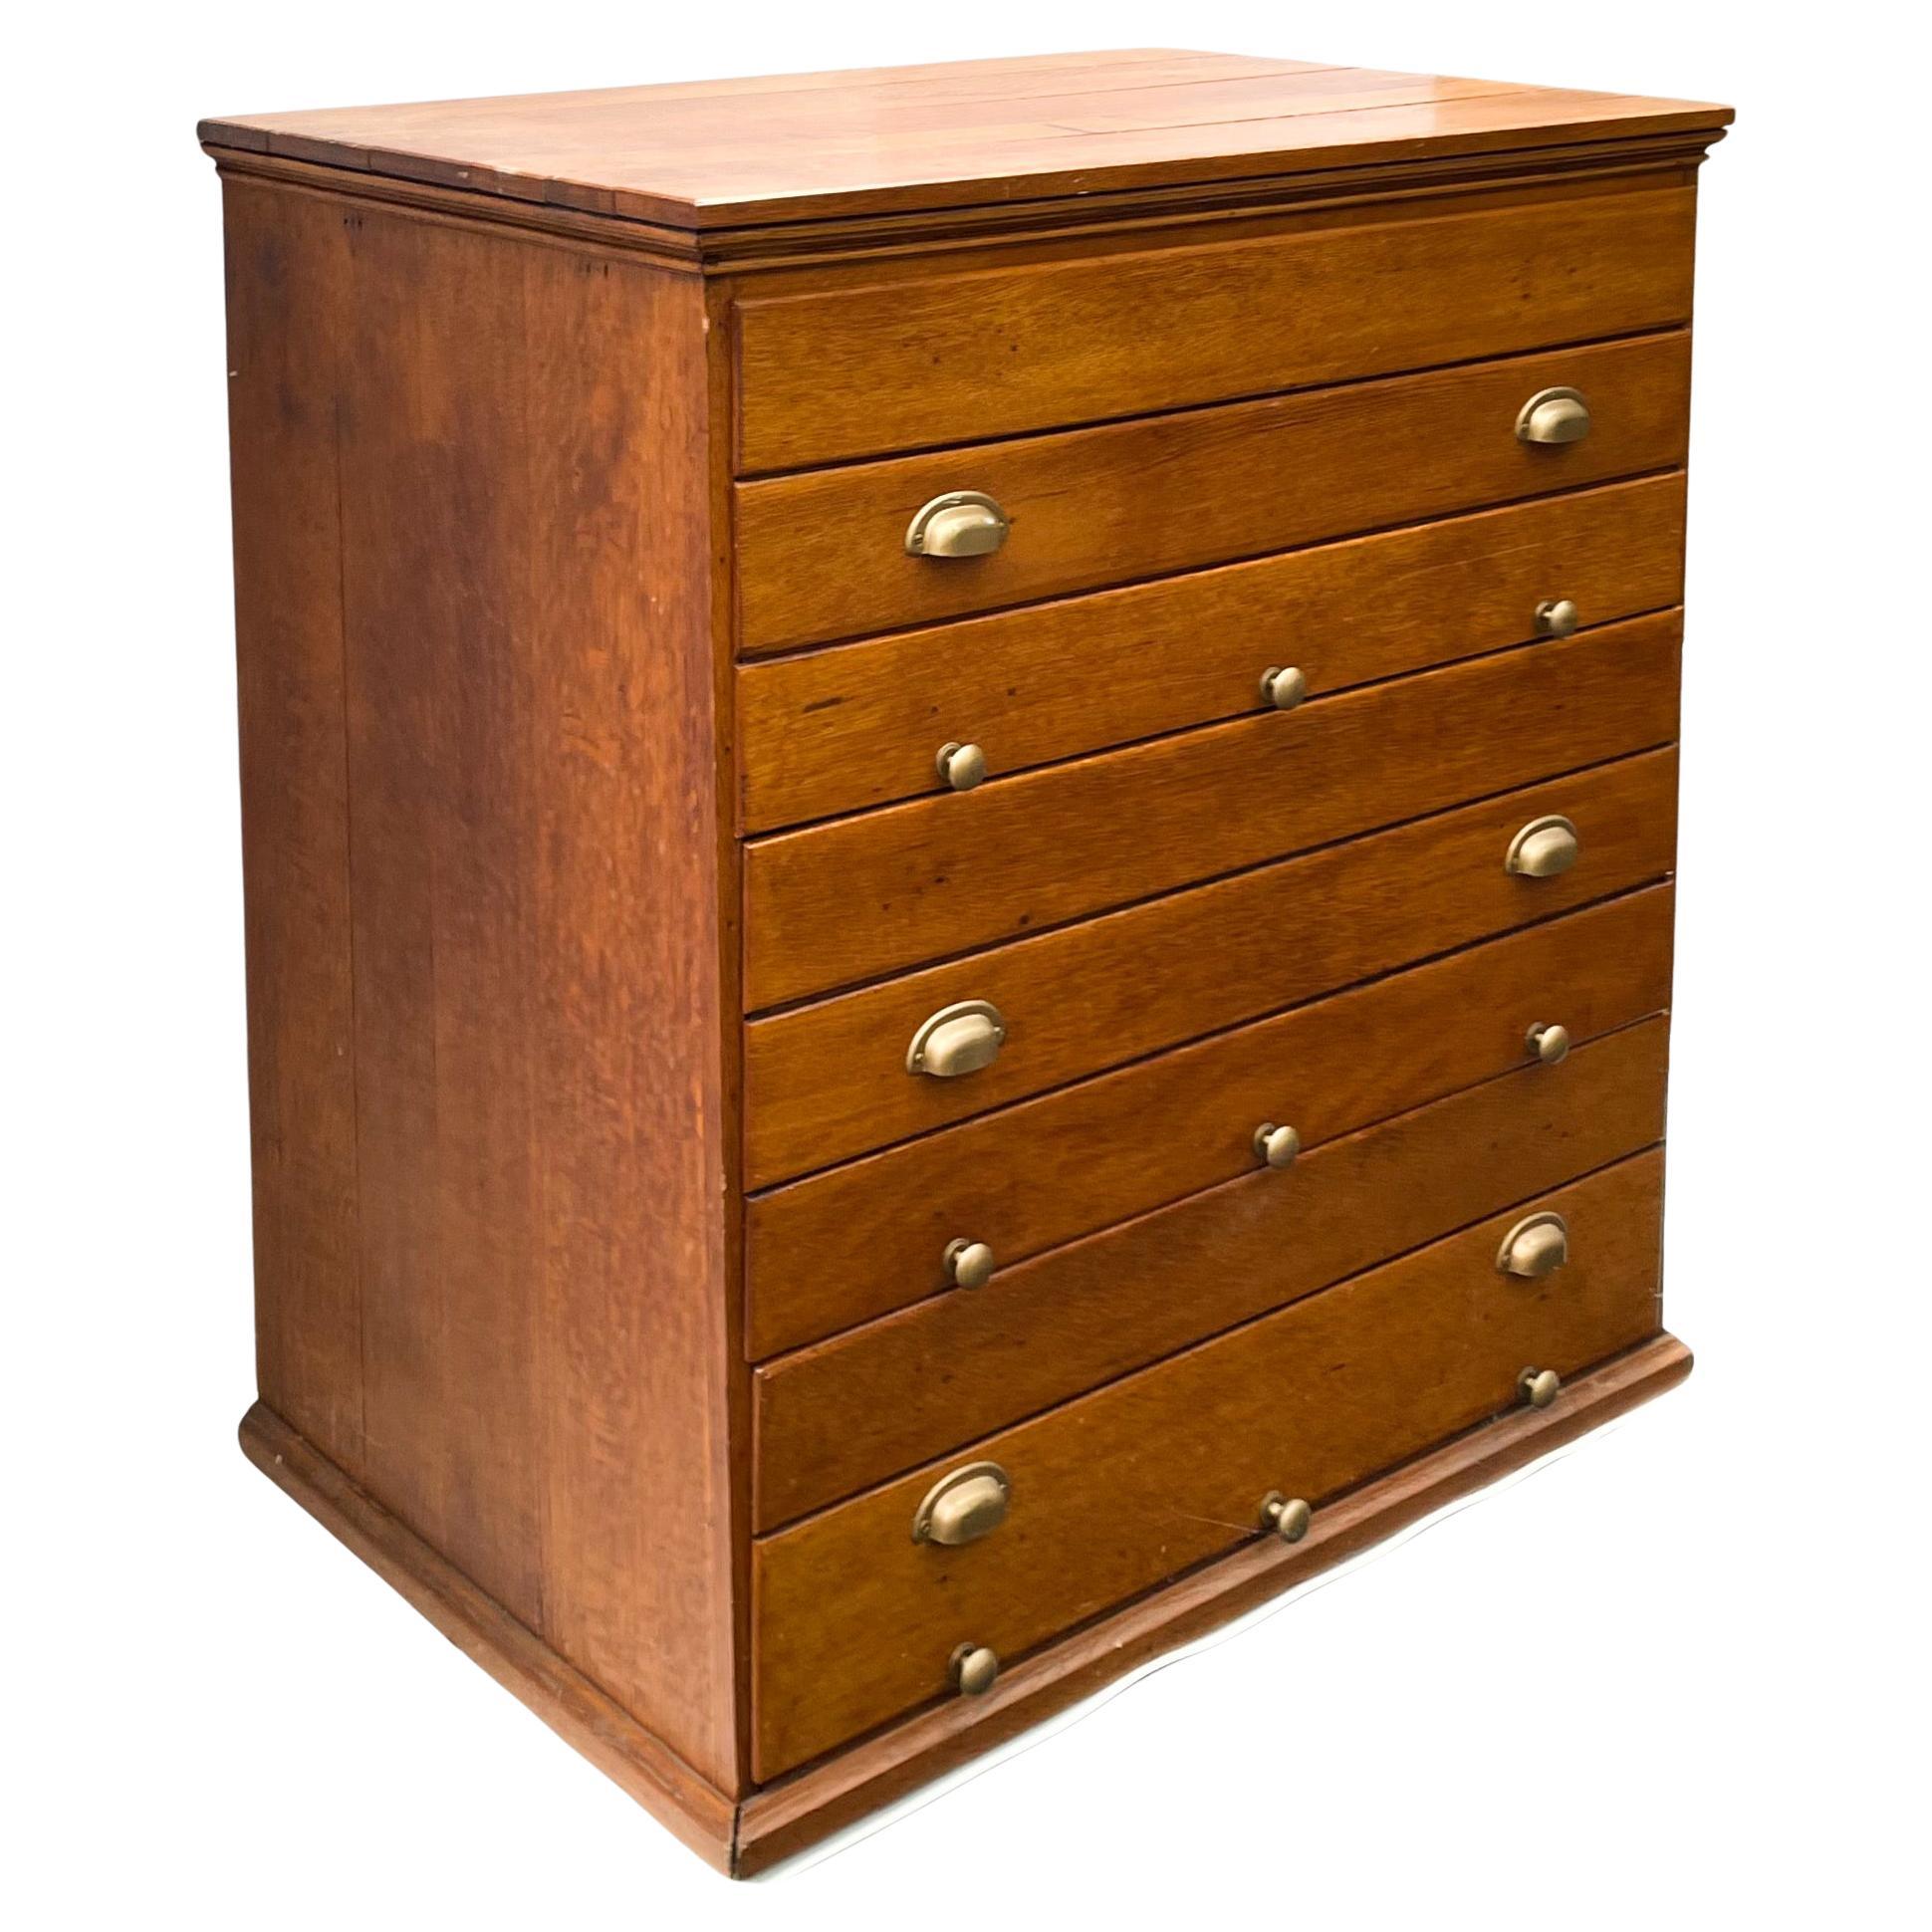 This is an early 20th century farmhouse modern style quarter sawn oak filing cabinet is in very good condition. Drawer heights 13”. The smaller knobs pull to adjust the interior file supports. Interior measurement is 11” in length with a depth of